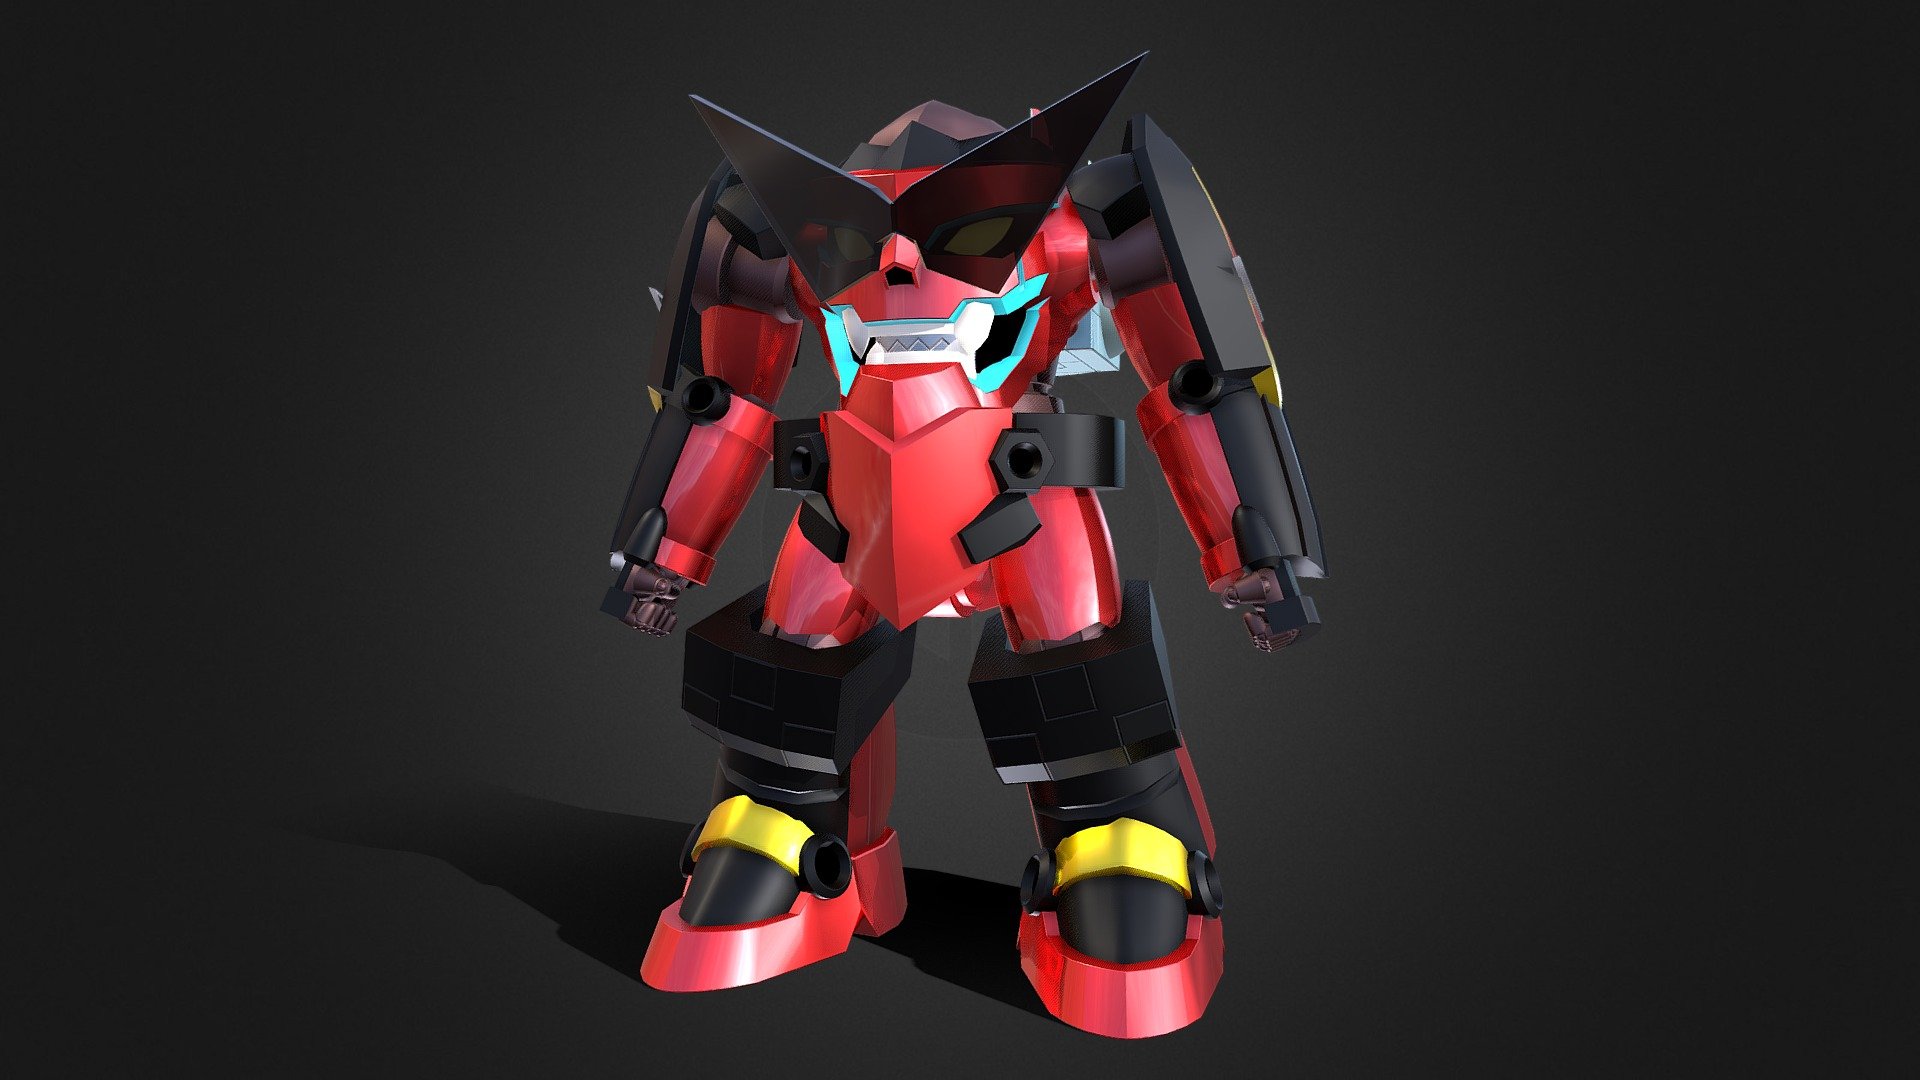 If you're interested in purchasing any of my models, contact me @ andrewdisaacs@yahoo.com

Kamina's personal Ganmen from the anime Tengen Toppa Gurren Lagann.

Made in 3DS Max by myself 3d model